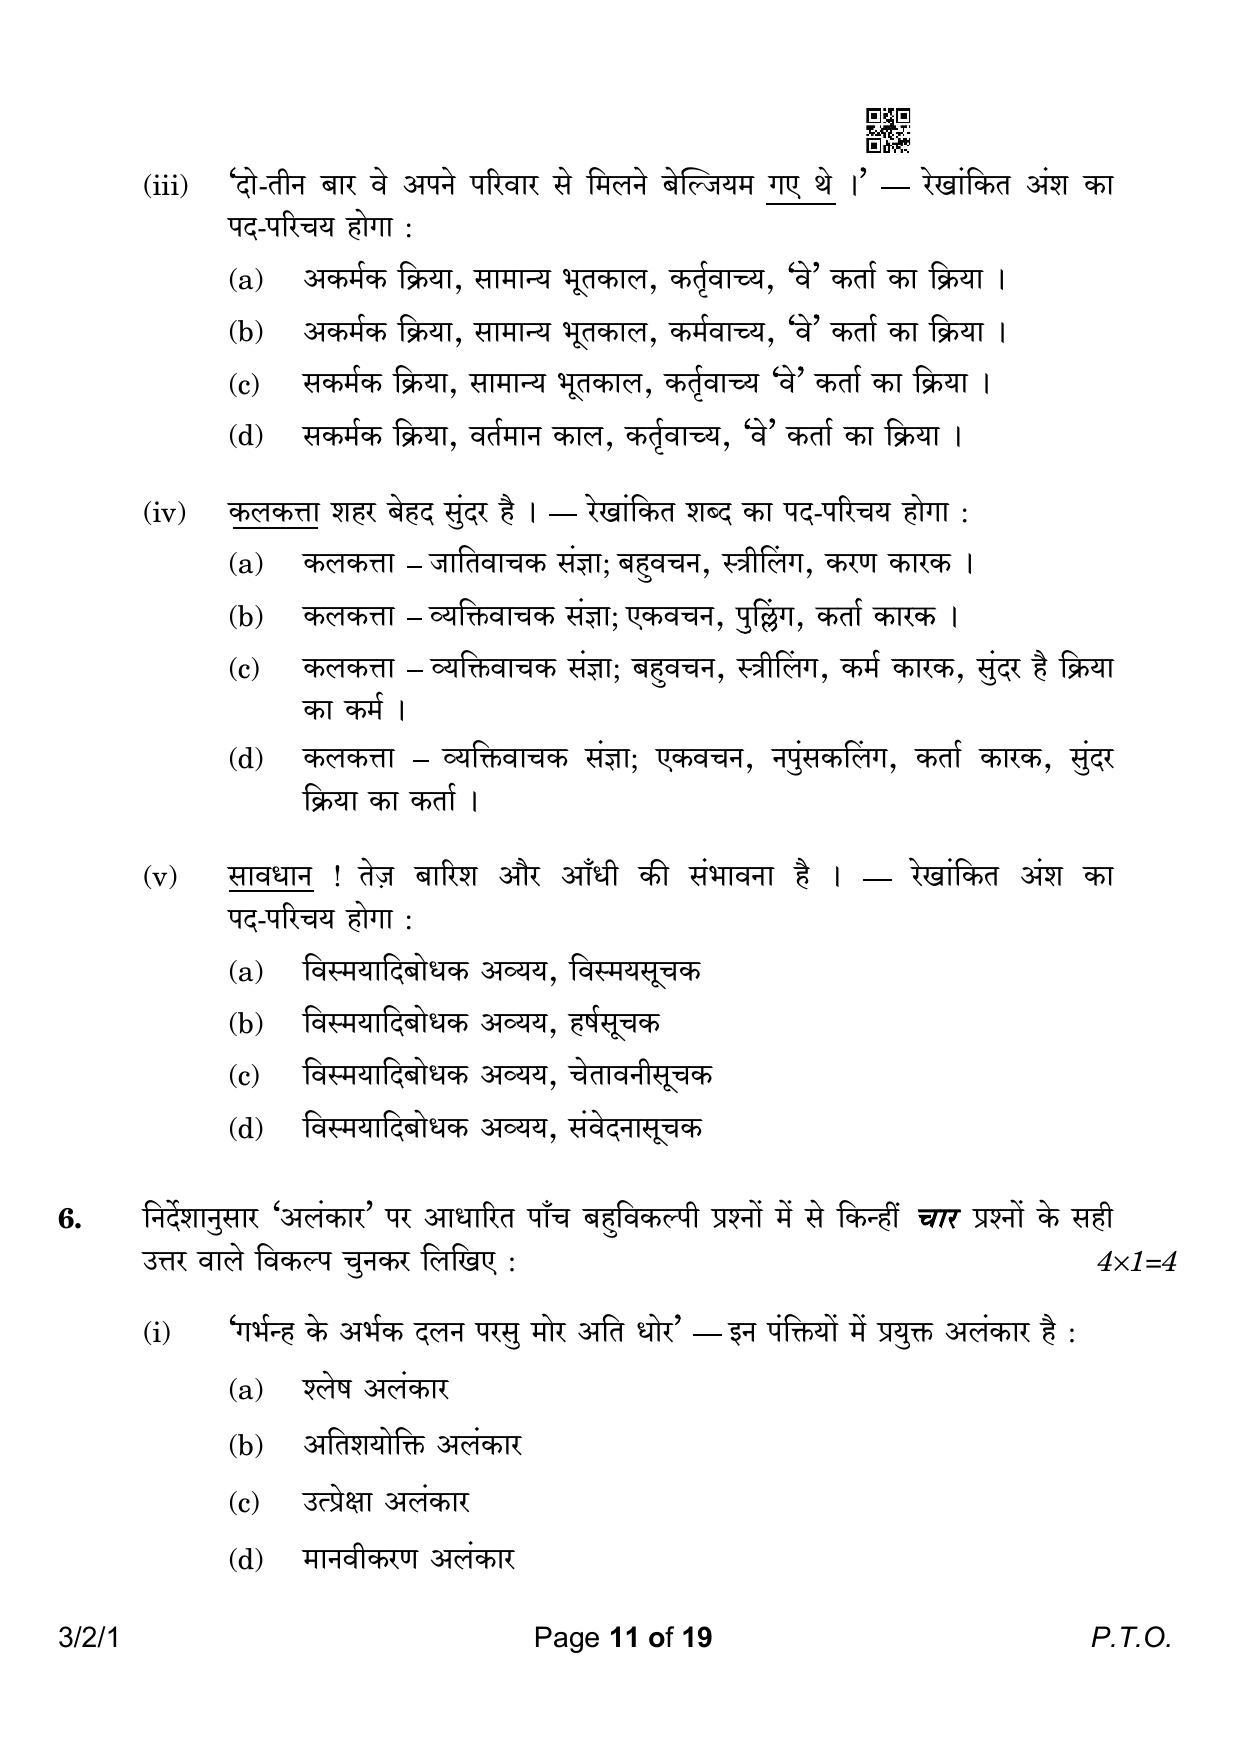 CBSE Class 10 3-2-1 Hindi A 2023 Question Paper - Page 11